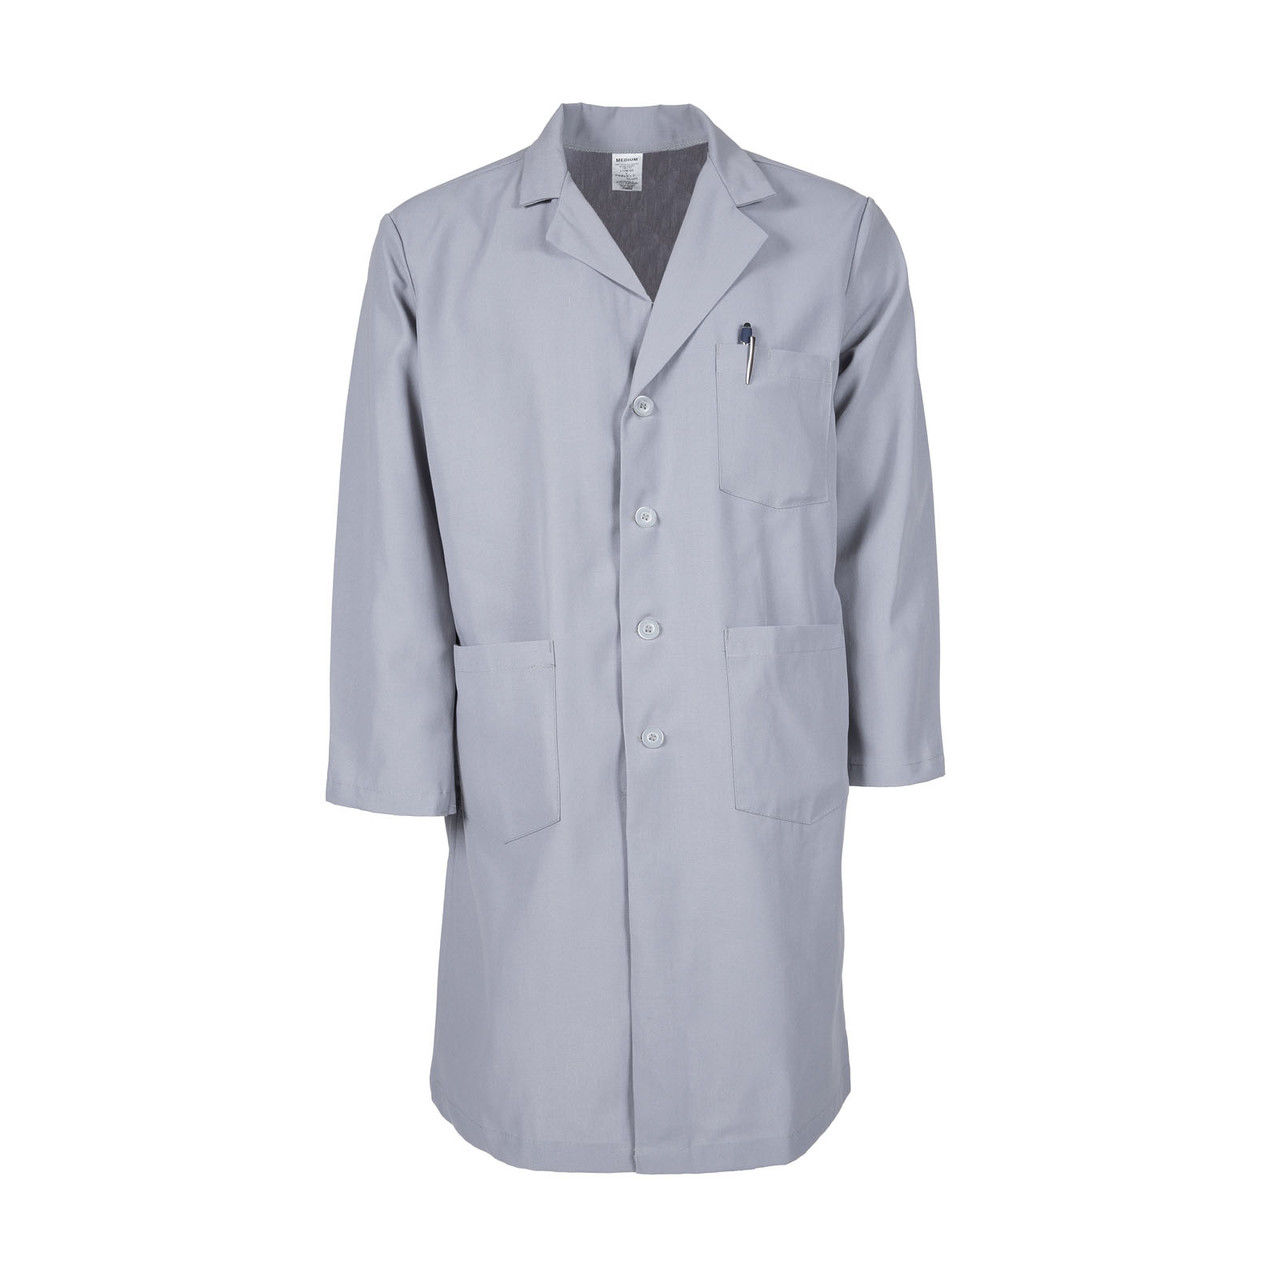 Does the gray lab coat for men resist soil and wrinkles?